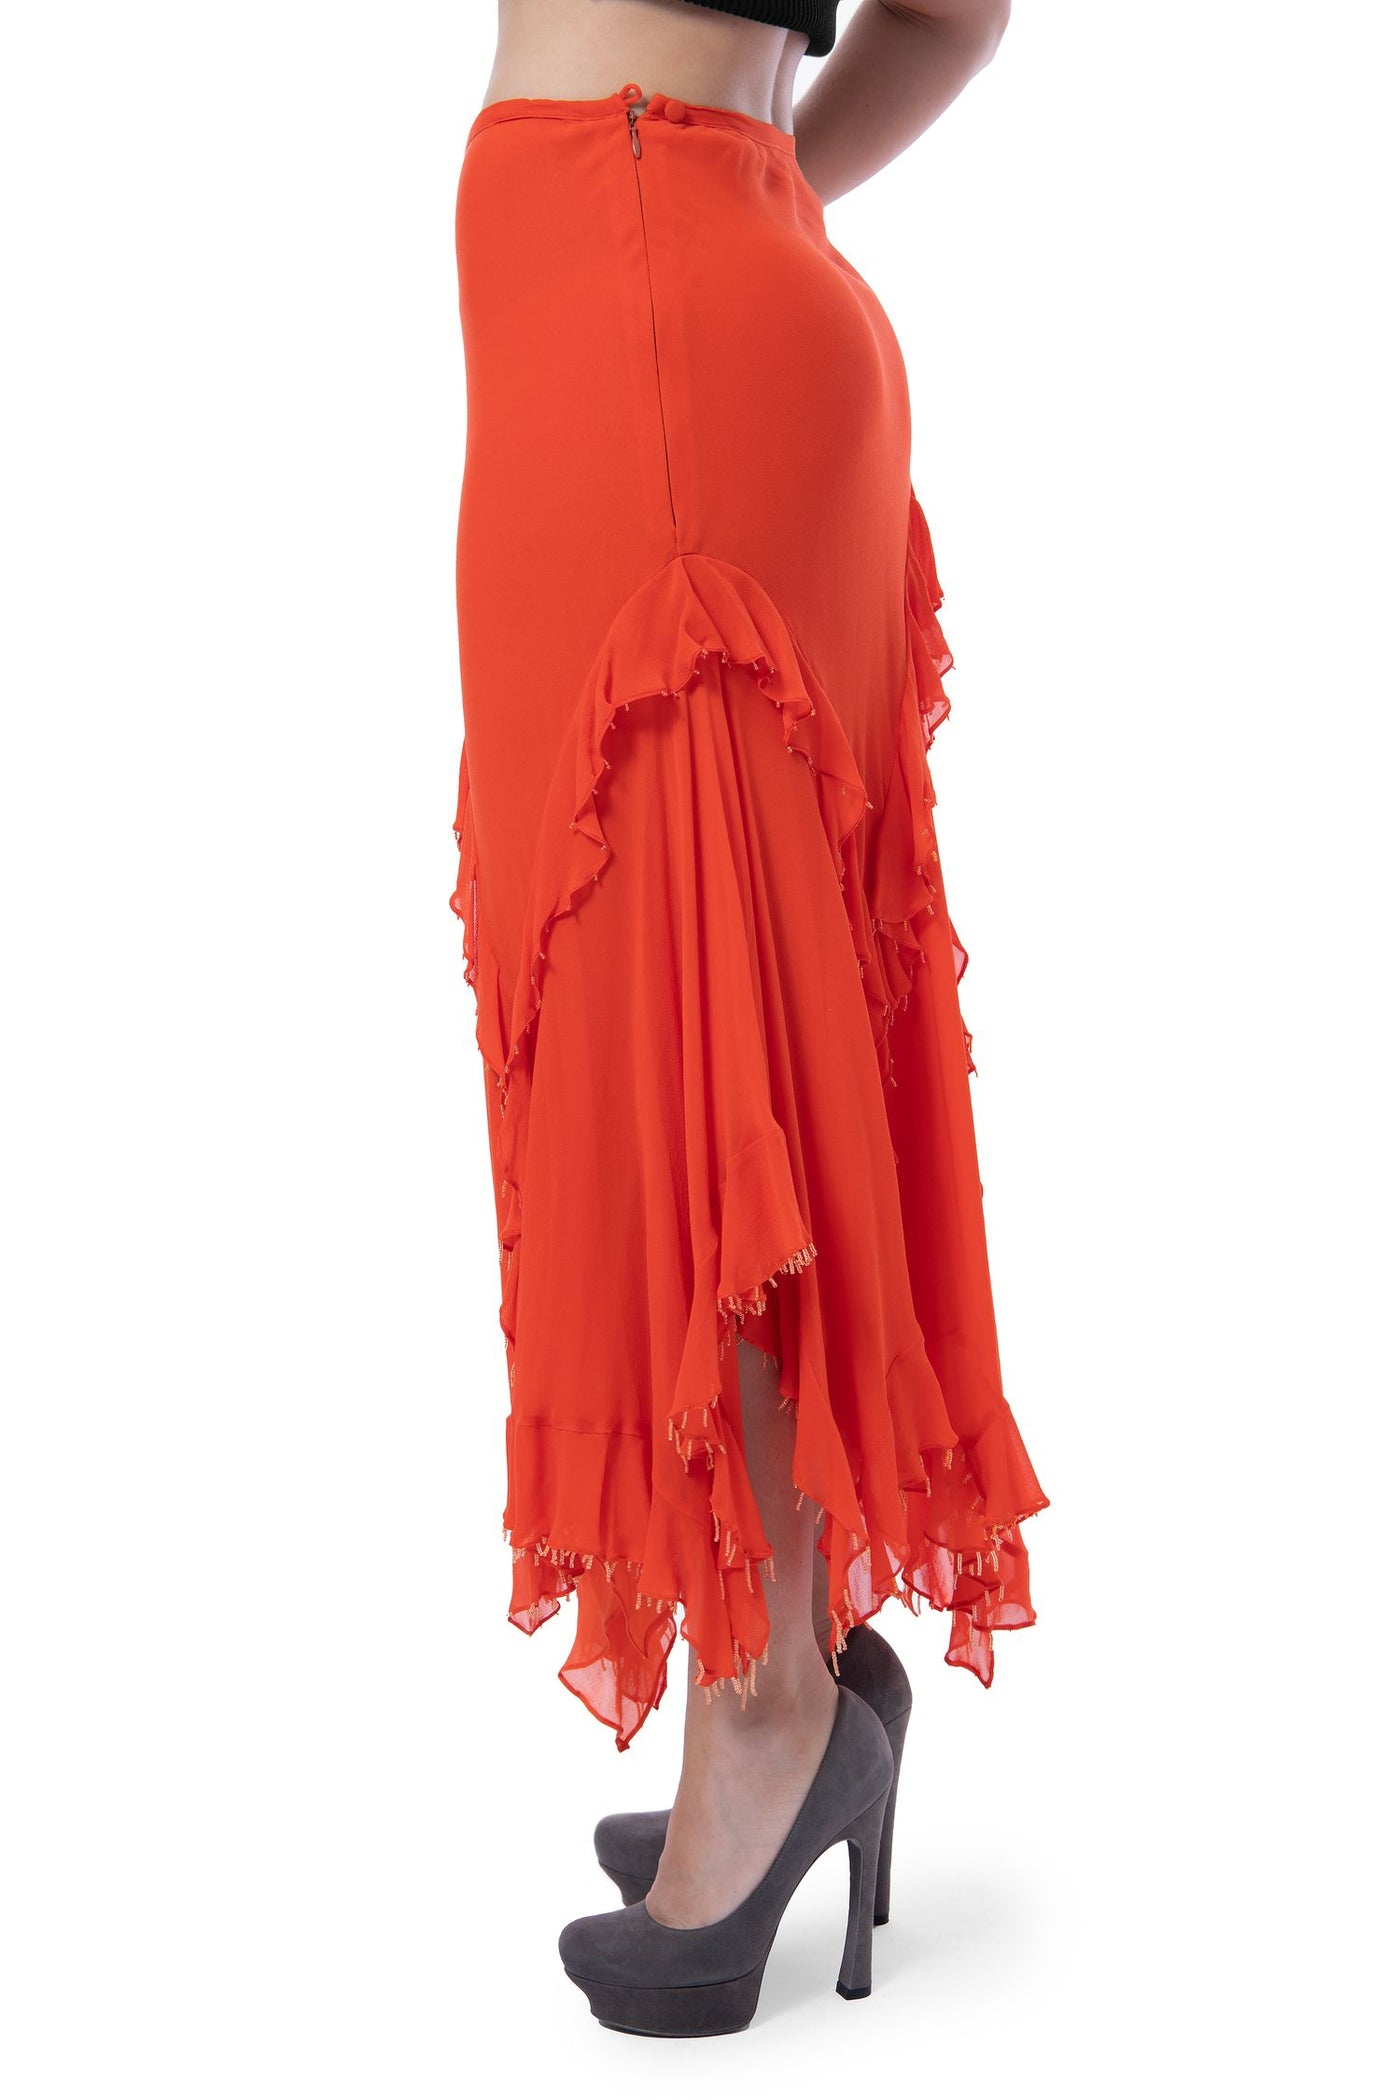 Orange maxi skirt with frill and beads